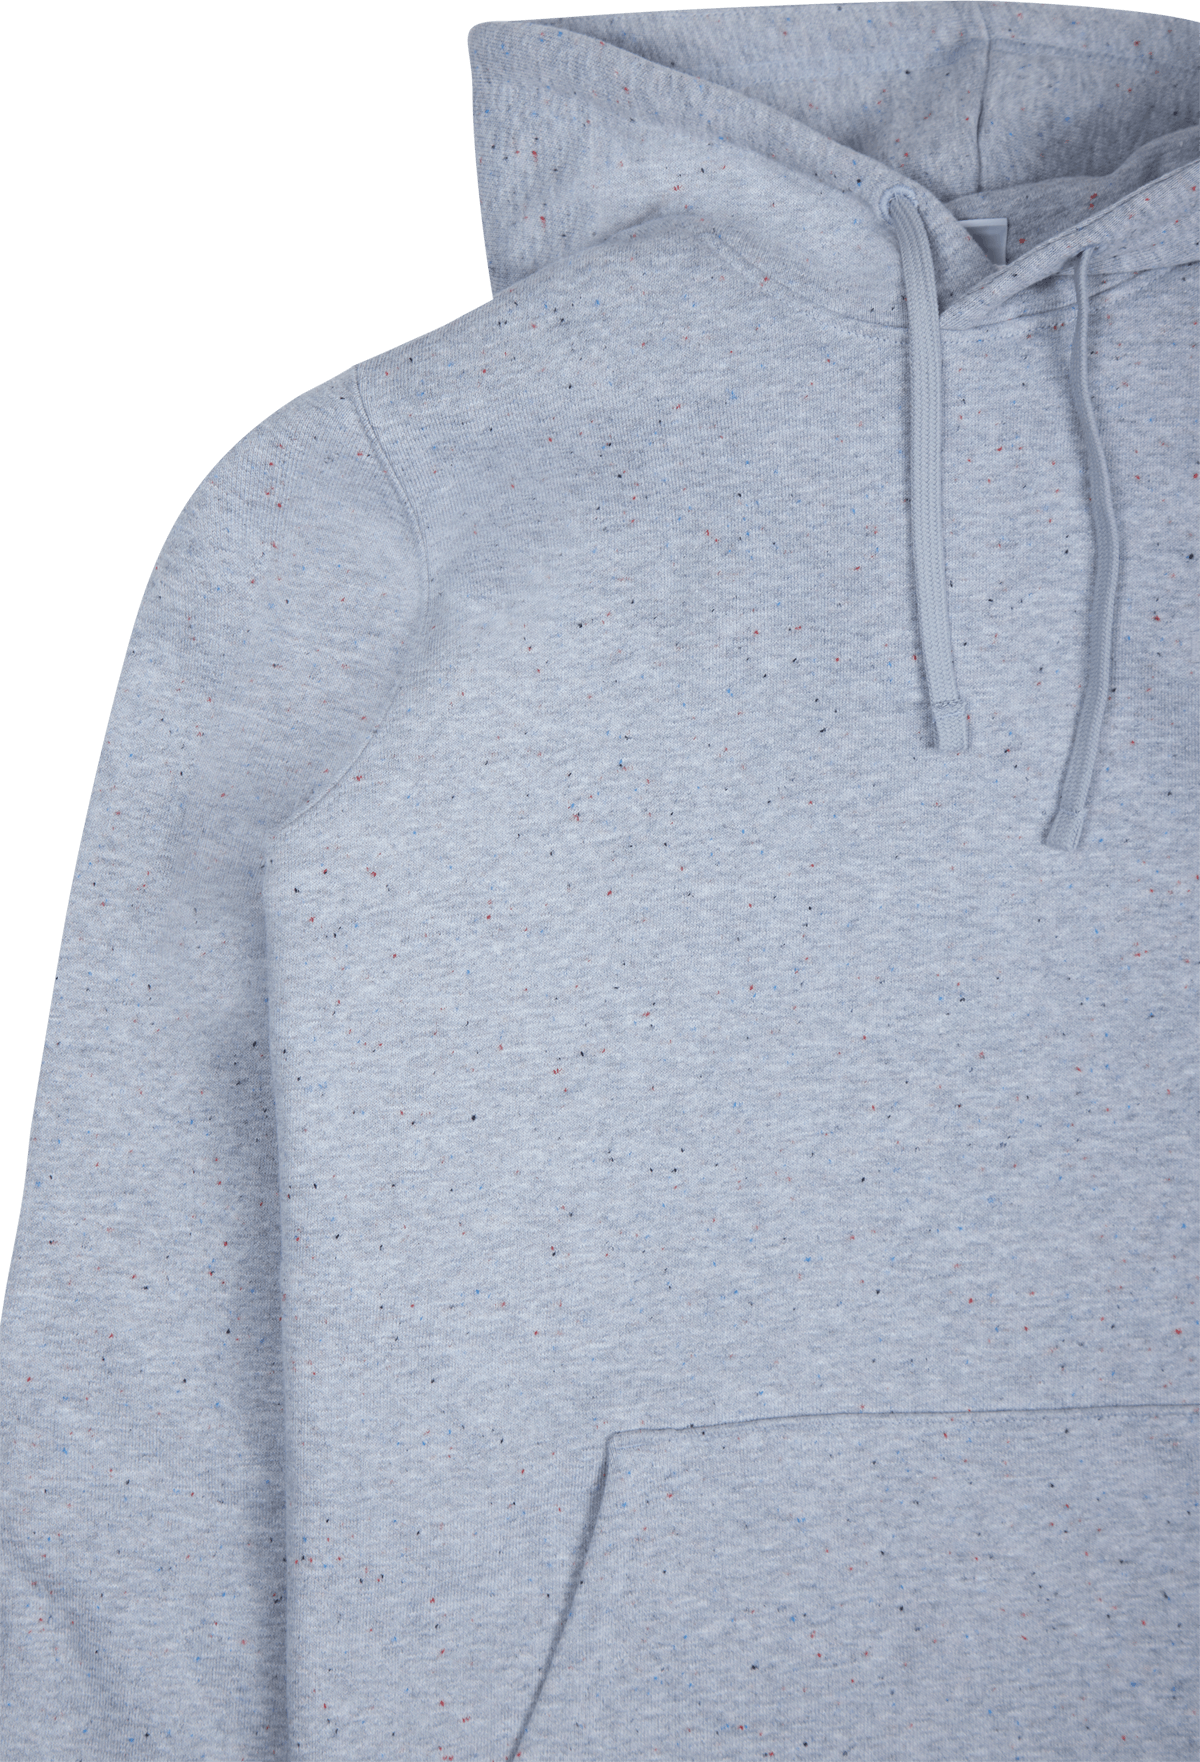 Re:collection Classics Hoodie  Light Gray Heather